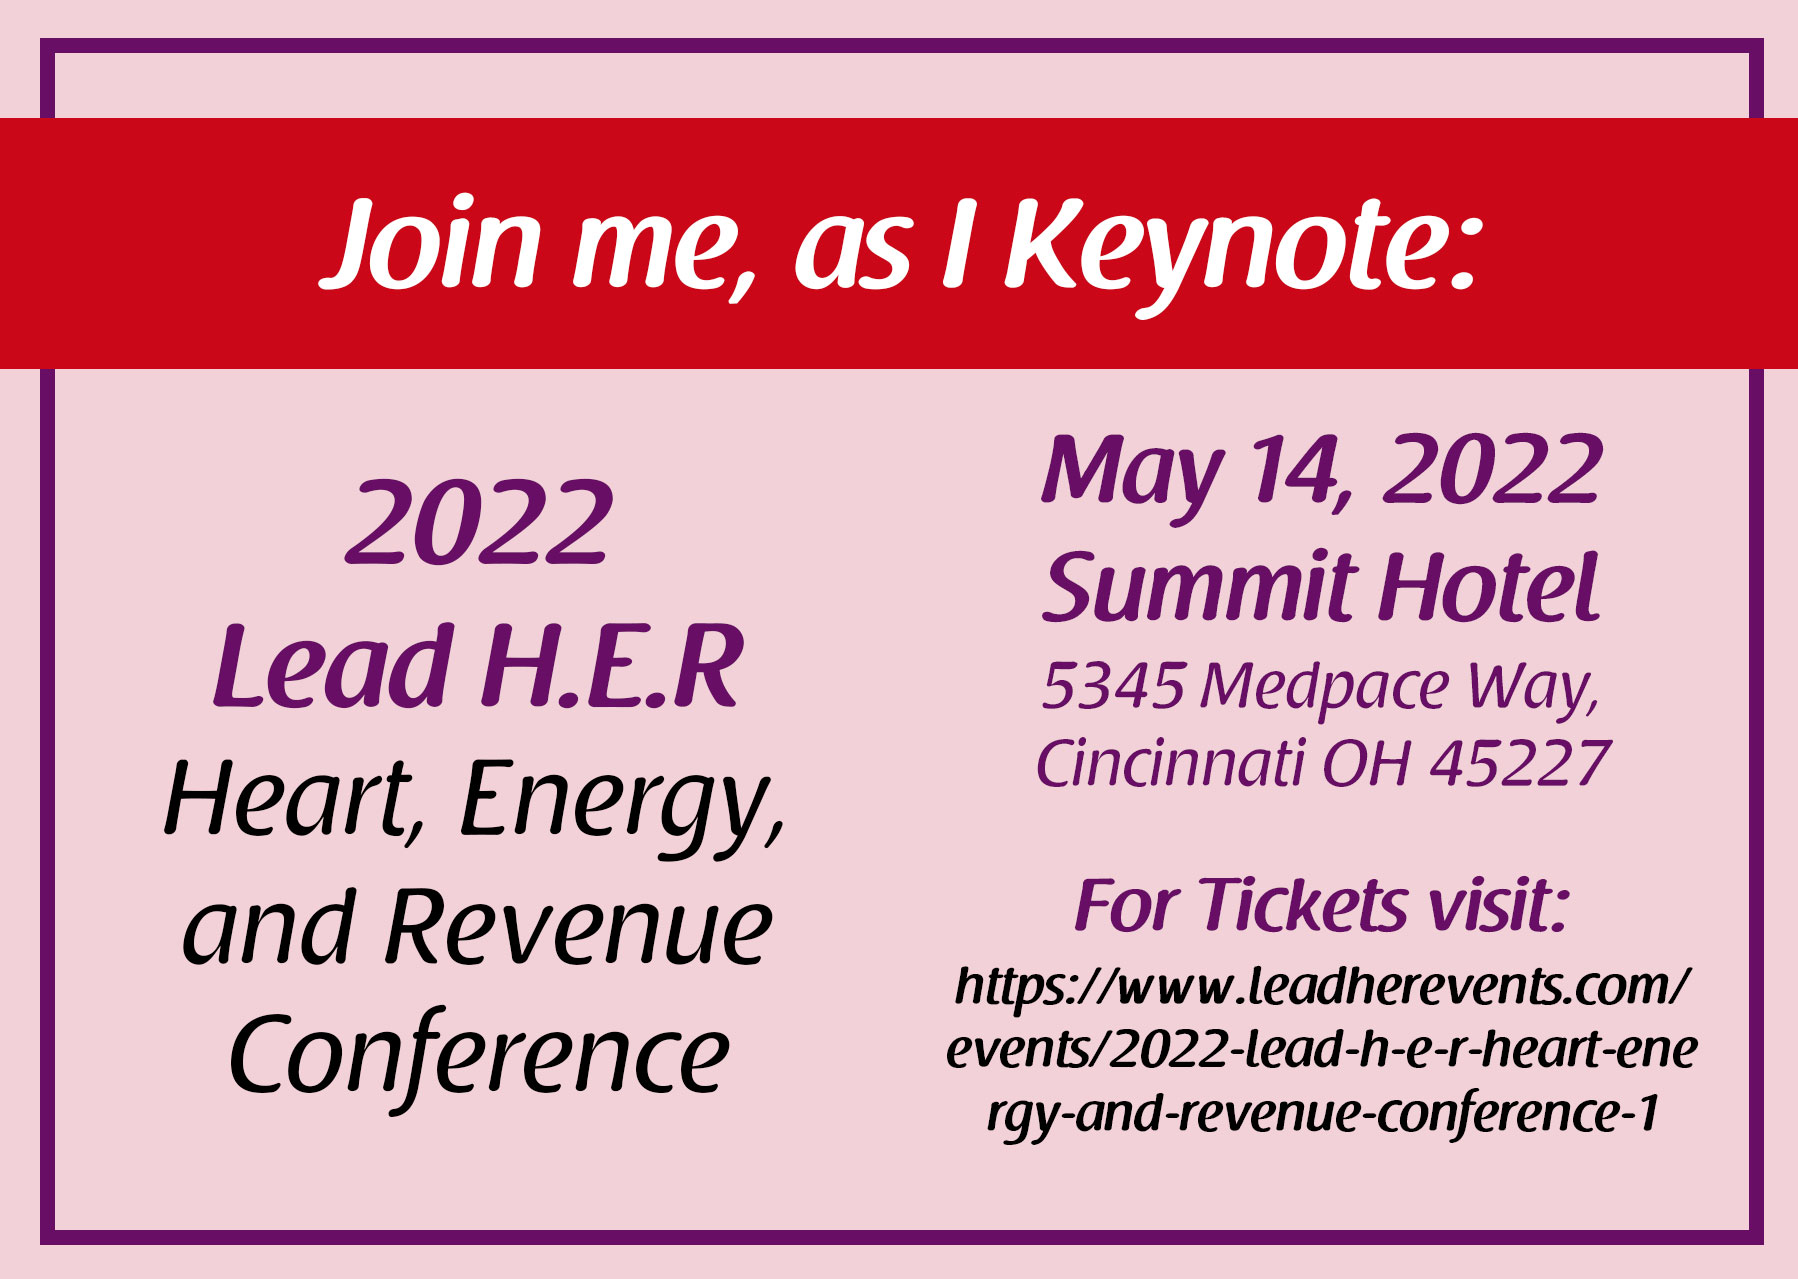 Heart, Energy and Revenue Conference